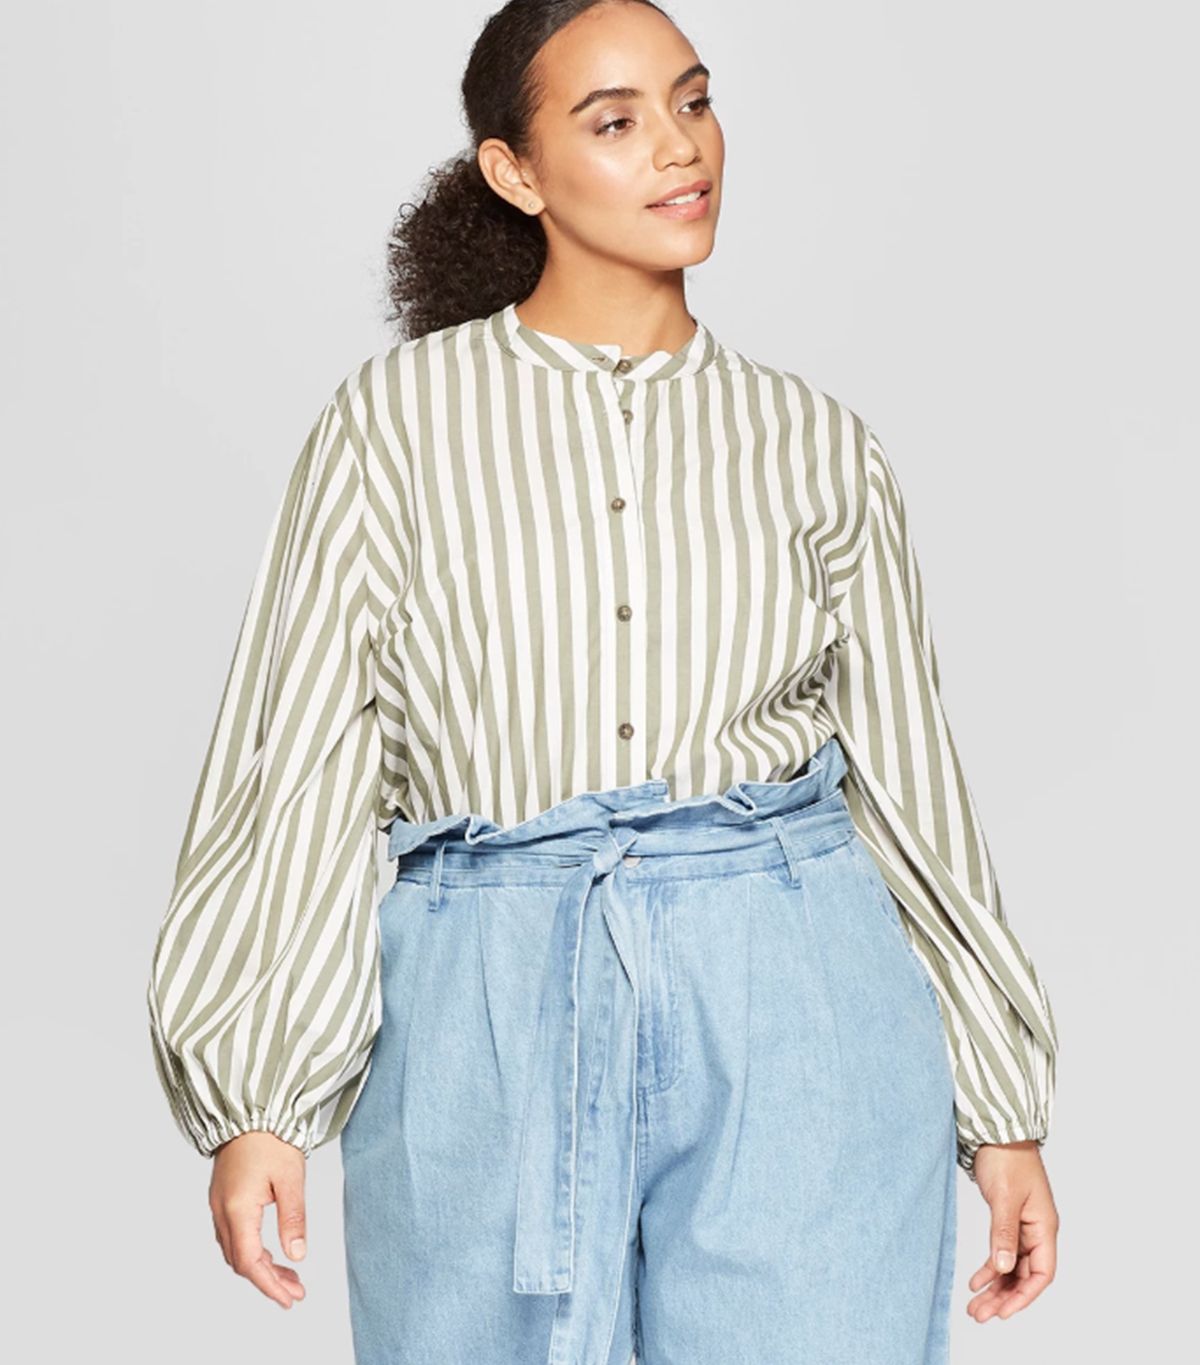 The Best Under-$30 Spring Tops From Who What Wear | Who What Wear